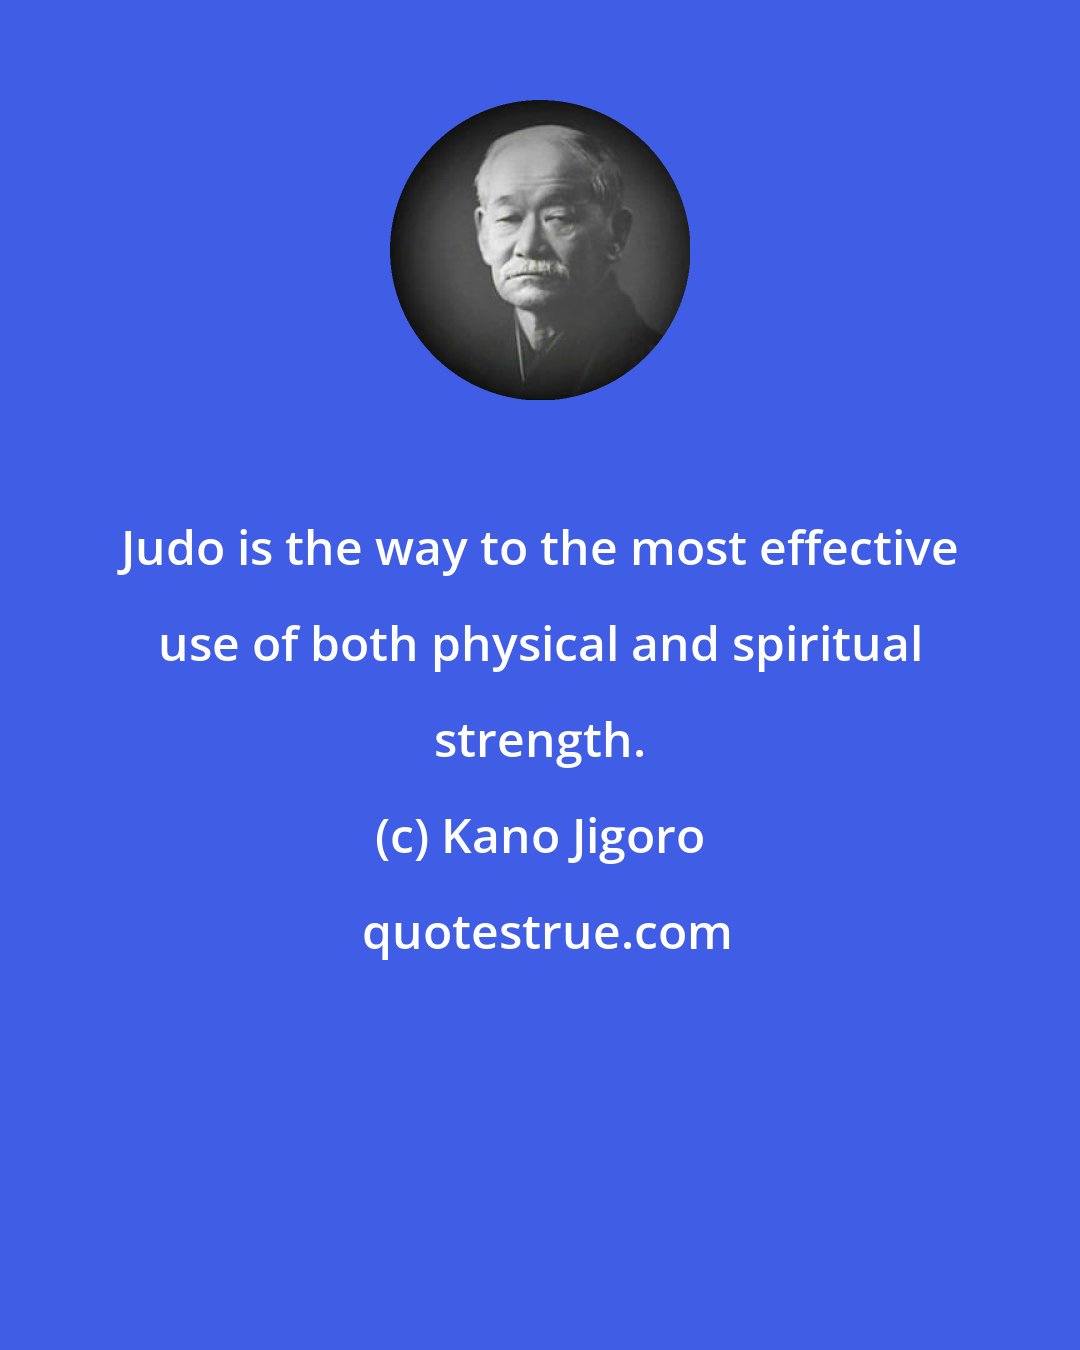 Kano Jigoro: Judo is the way to the most effective use of both physical and spiritual strength.